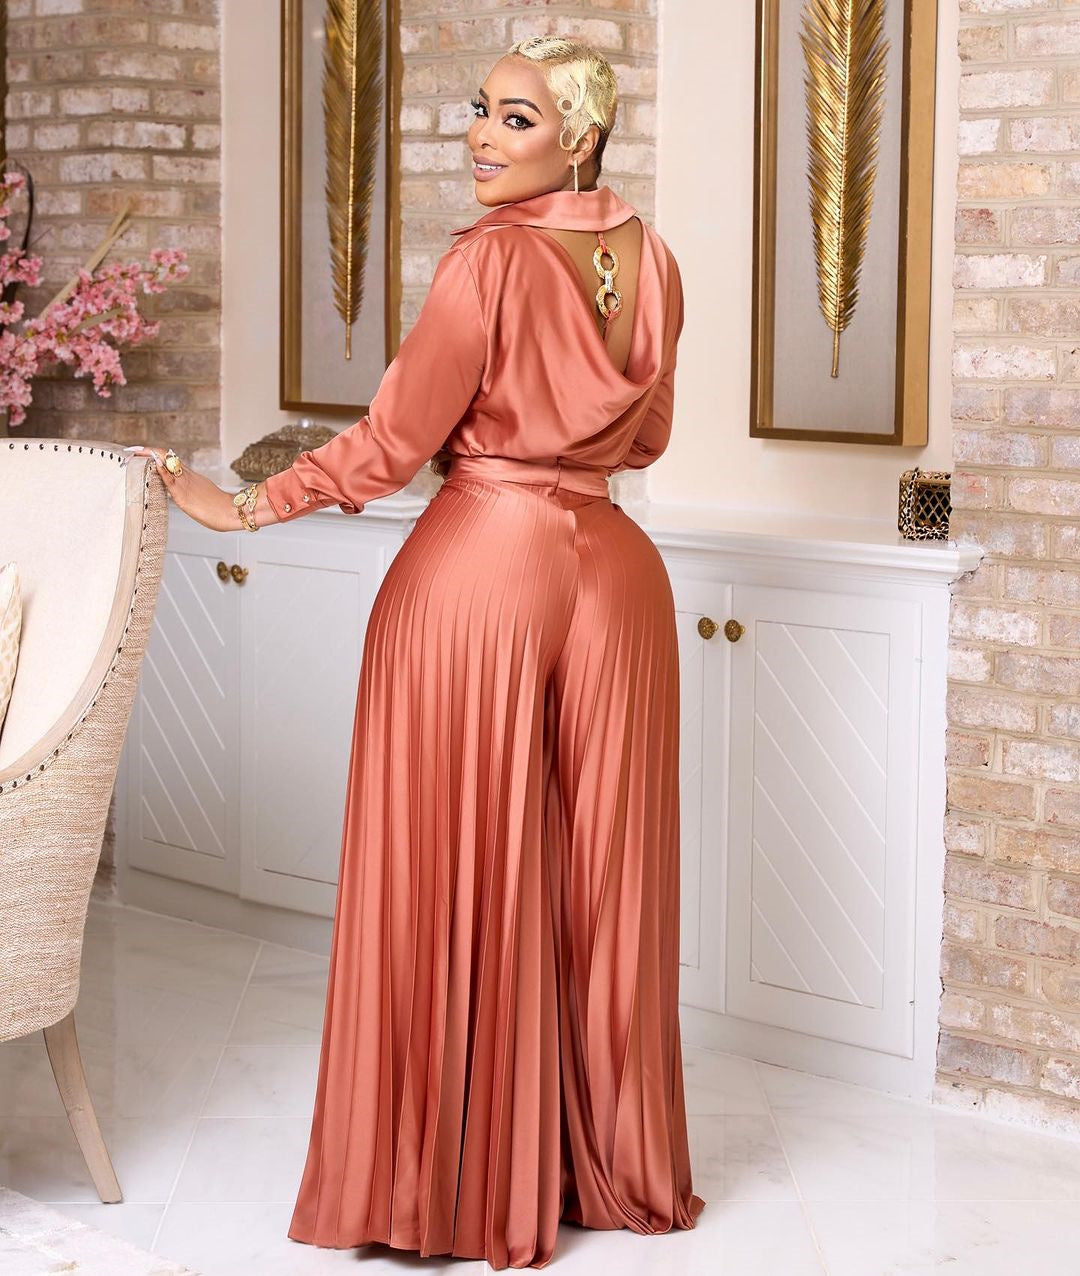 Temperament Slim Fit Backless Shirt Pleated Wide Leg Trousers Casual Suit